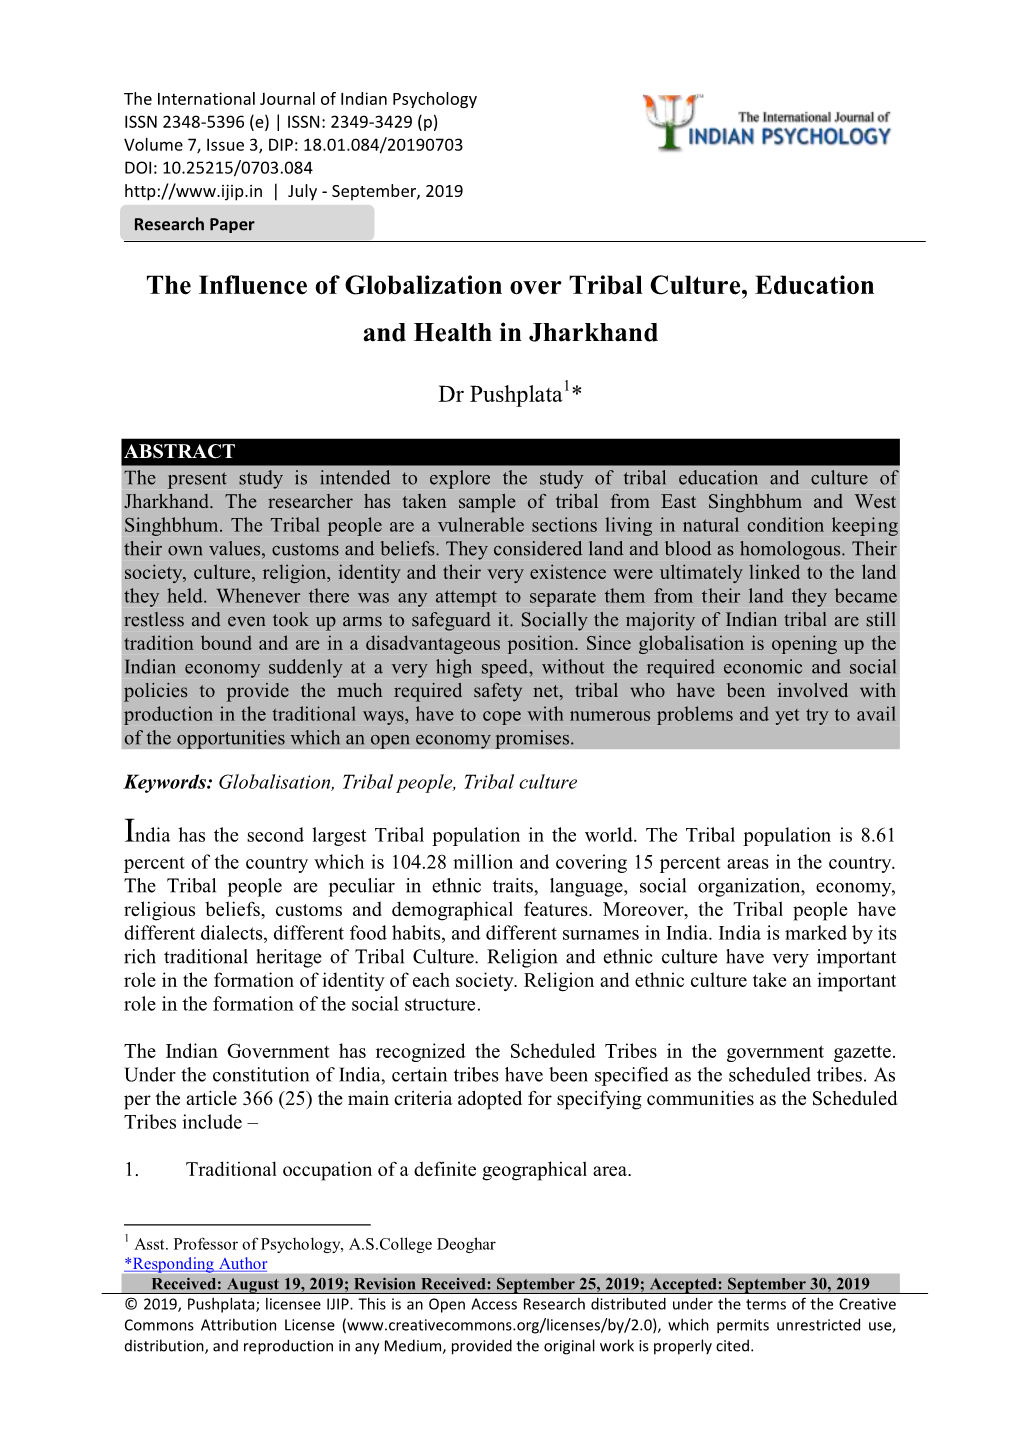 The Influence of Globalization Over Tribal Culture, Education and Health in Jharkhand